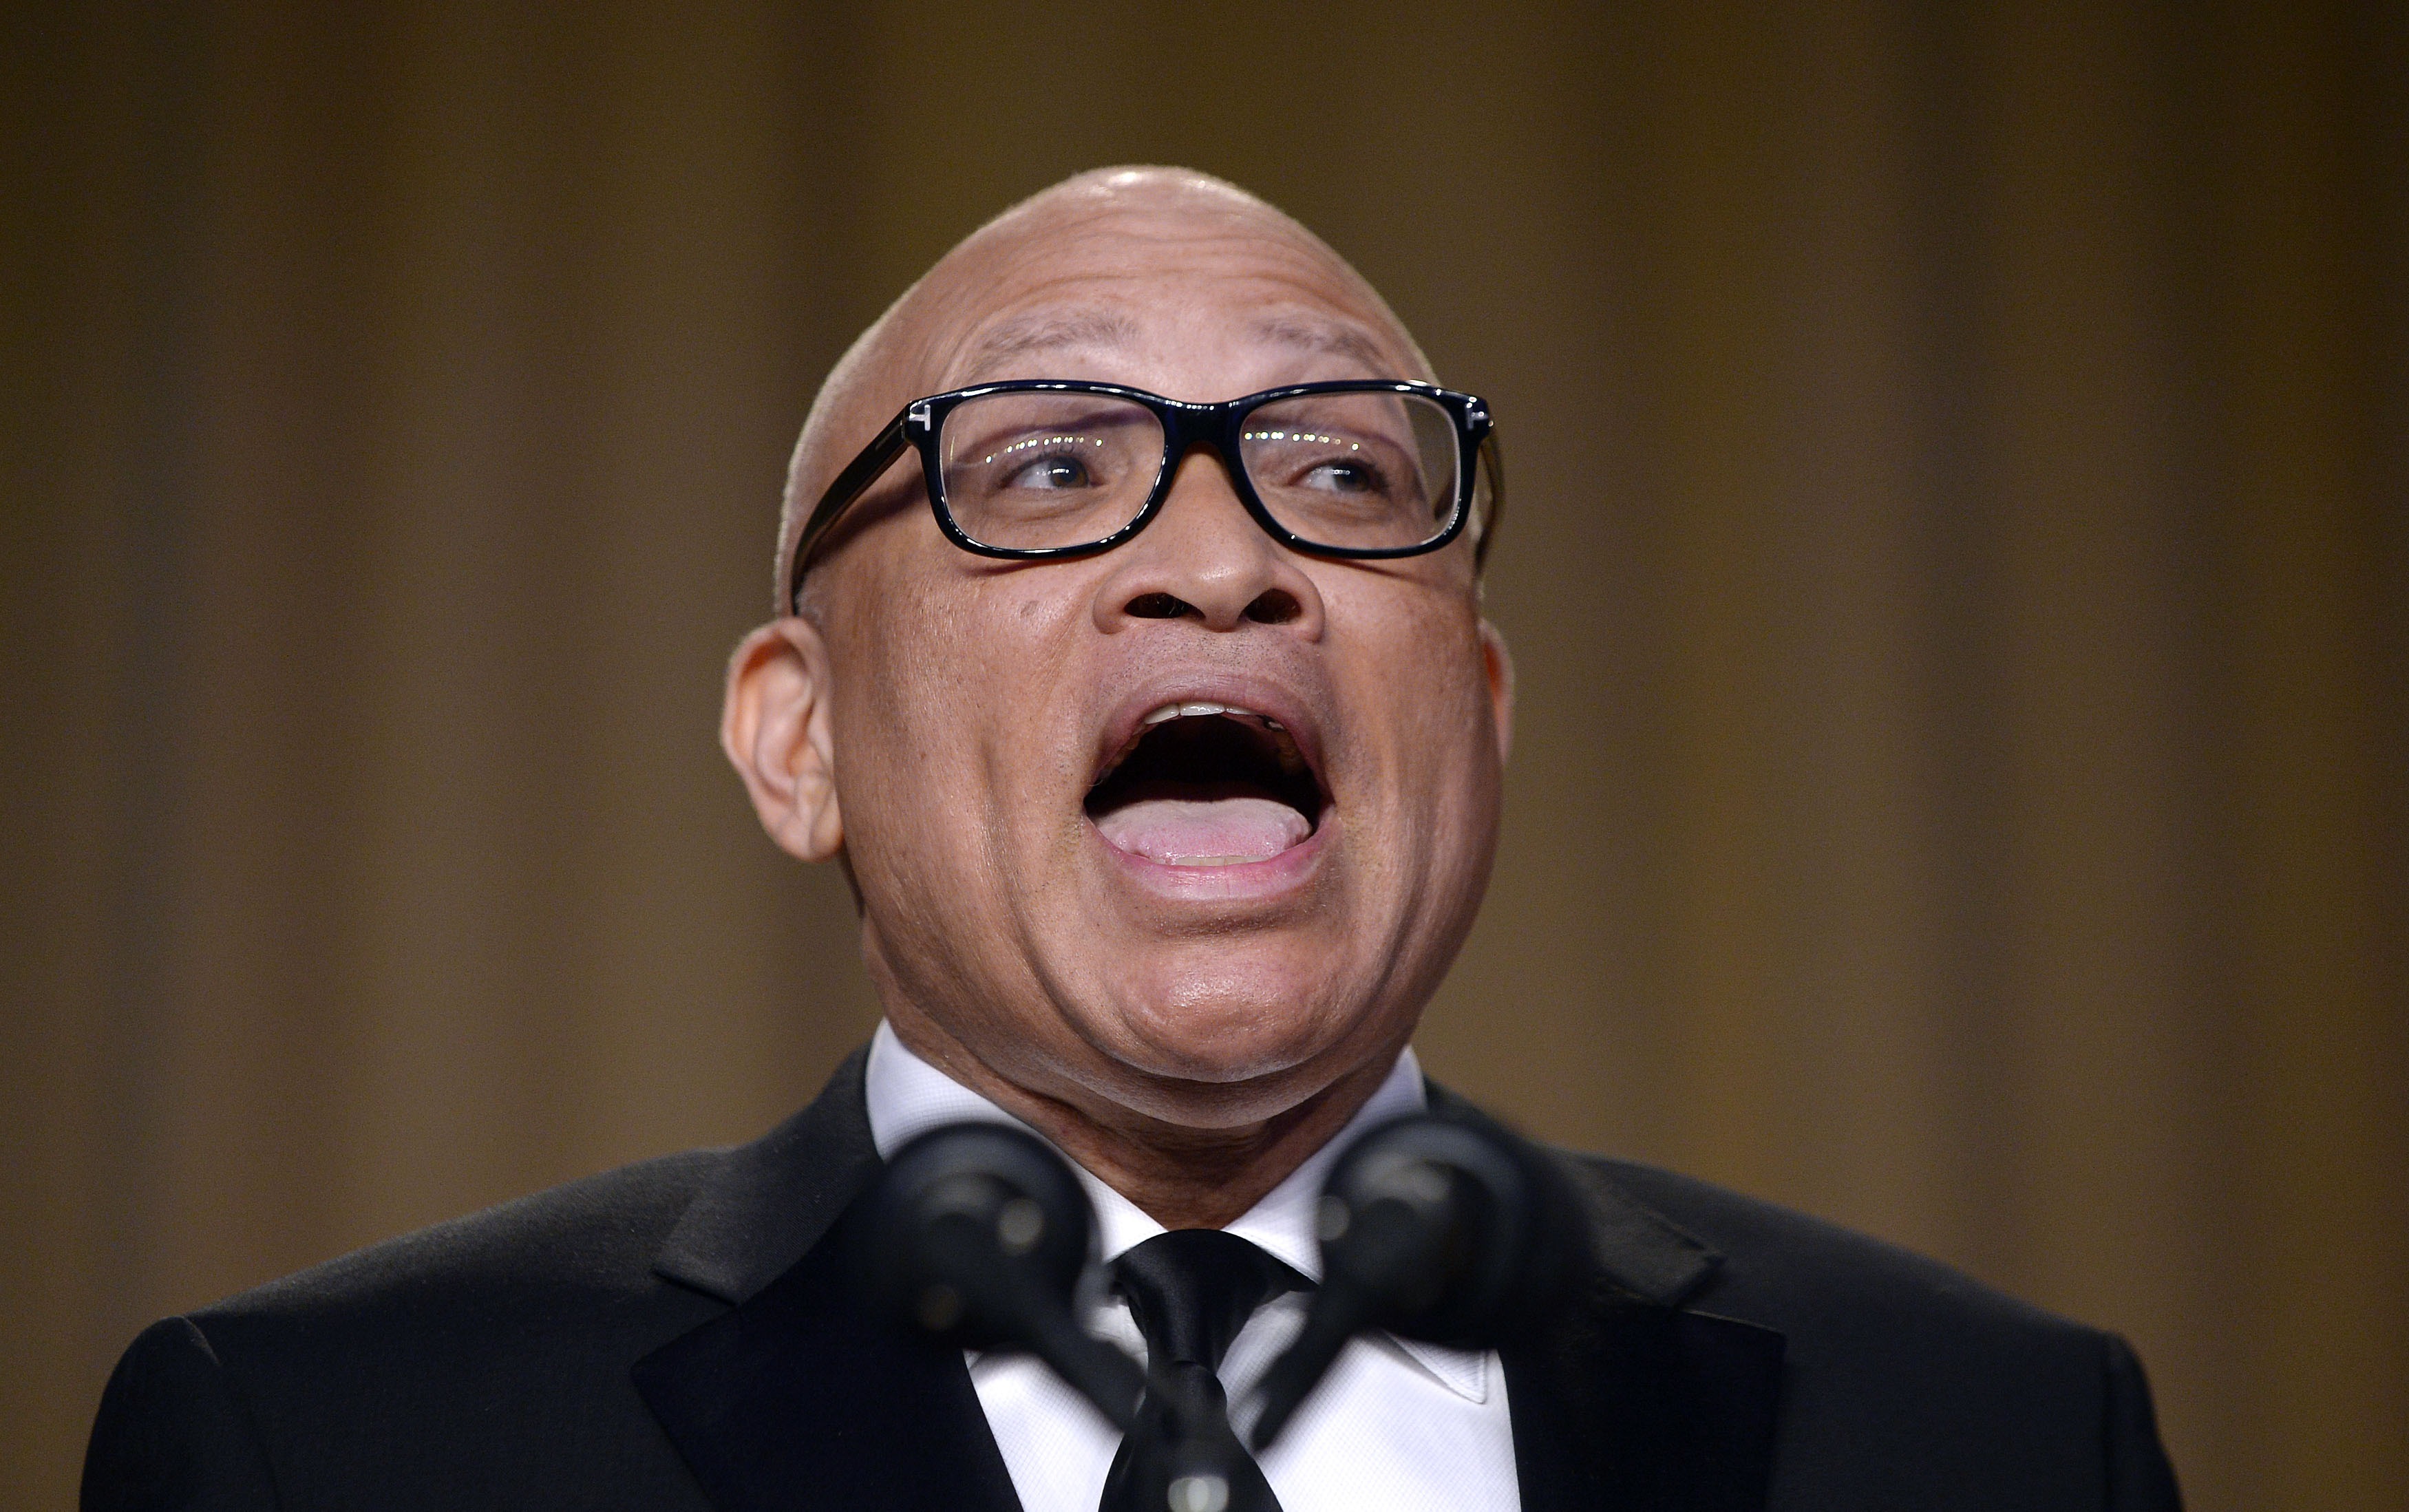 WASHINGTON, DC - APRIL 30: (AFP OUT) Comedian Larry Wilmore speaks during the White House Correspondents' Association annual dinner on April 30, 2016 at the Washington Hilton hotel in Washington.This is President Obama's eighth and final White House Correspondents' Association dinner. (Olivier Douliery-Pool—Getty Images)